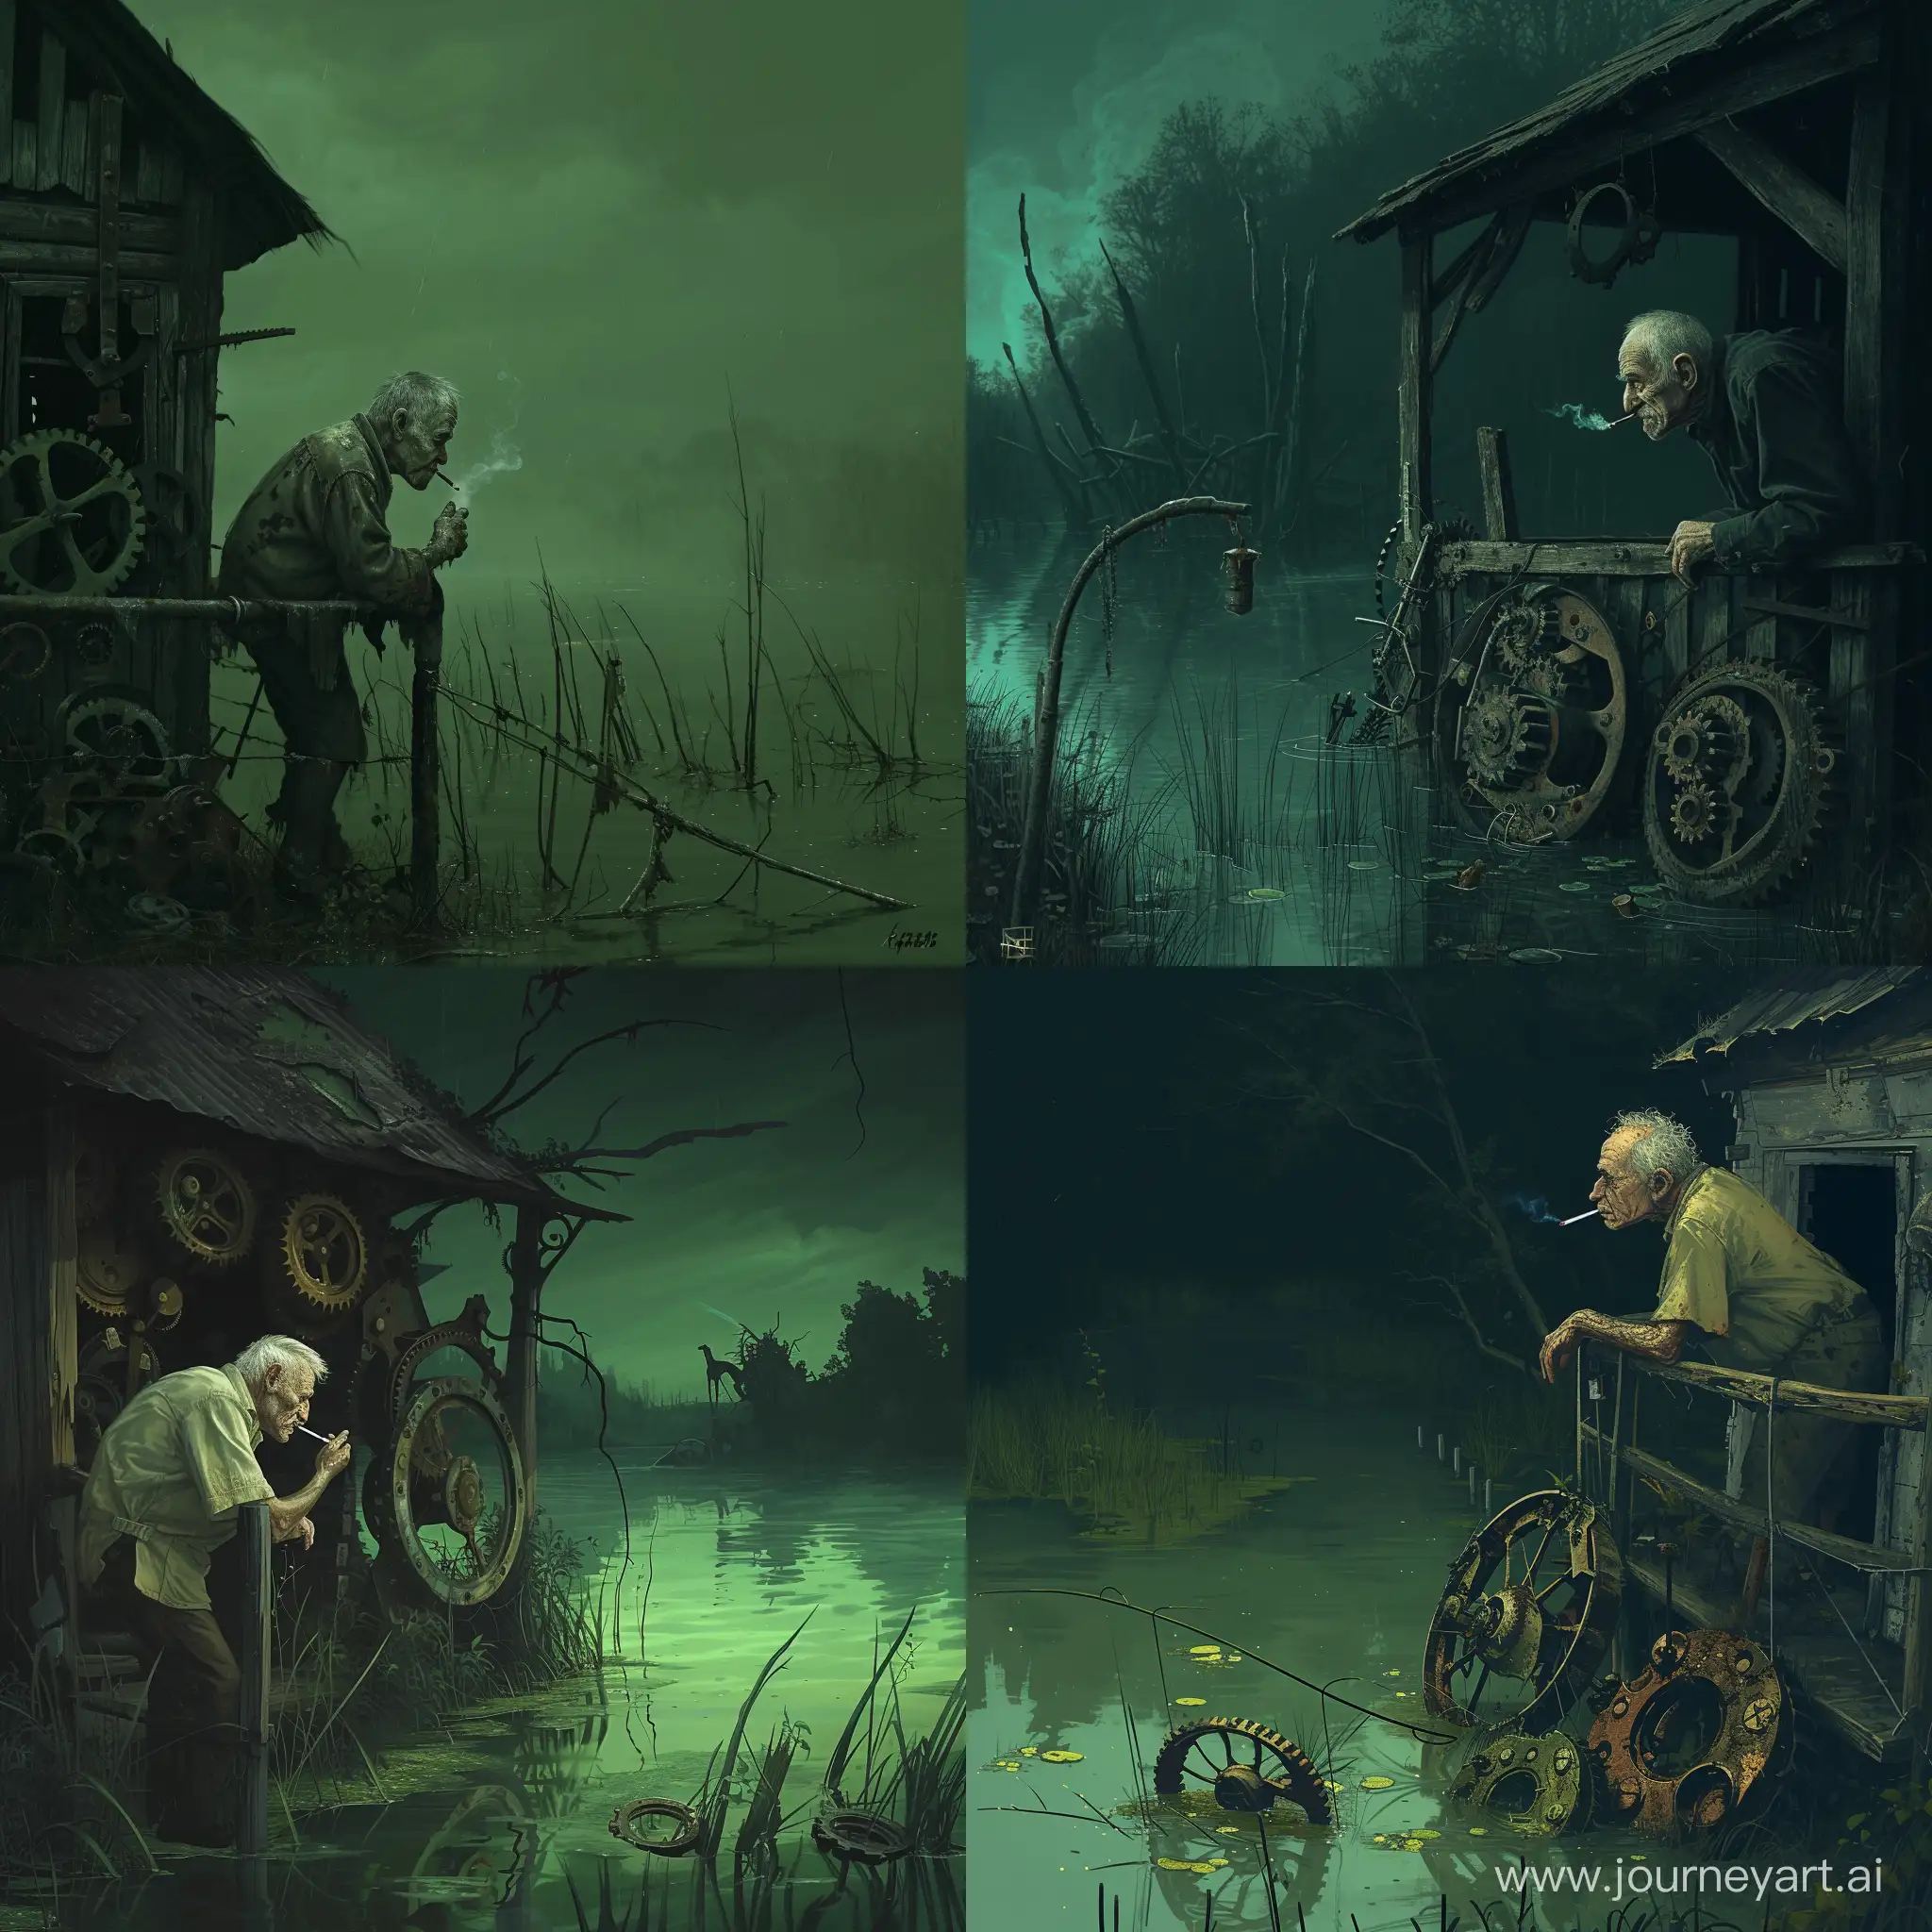 Old grandpa is standing on the porch of a small old hut leaning on a fence and smoking a cigarette, with a sad face looking at the gears and old abandoned mechanisms slightly peeking out of the water in the swamp, swampy area, dark green gloomy, realism, night there is no light